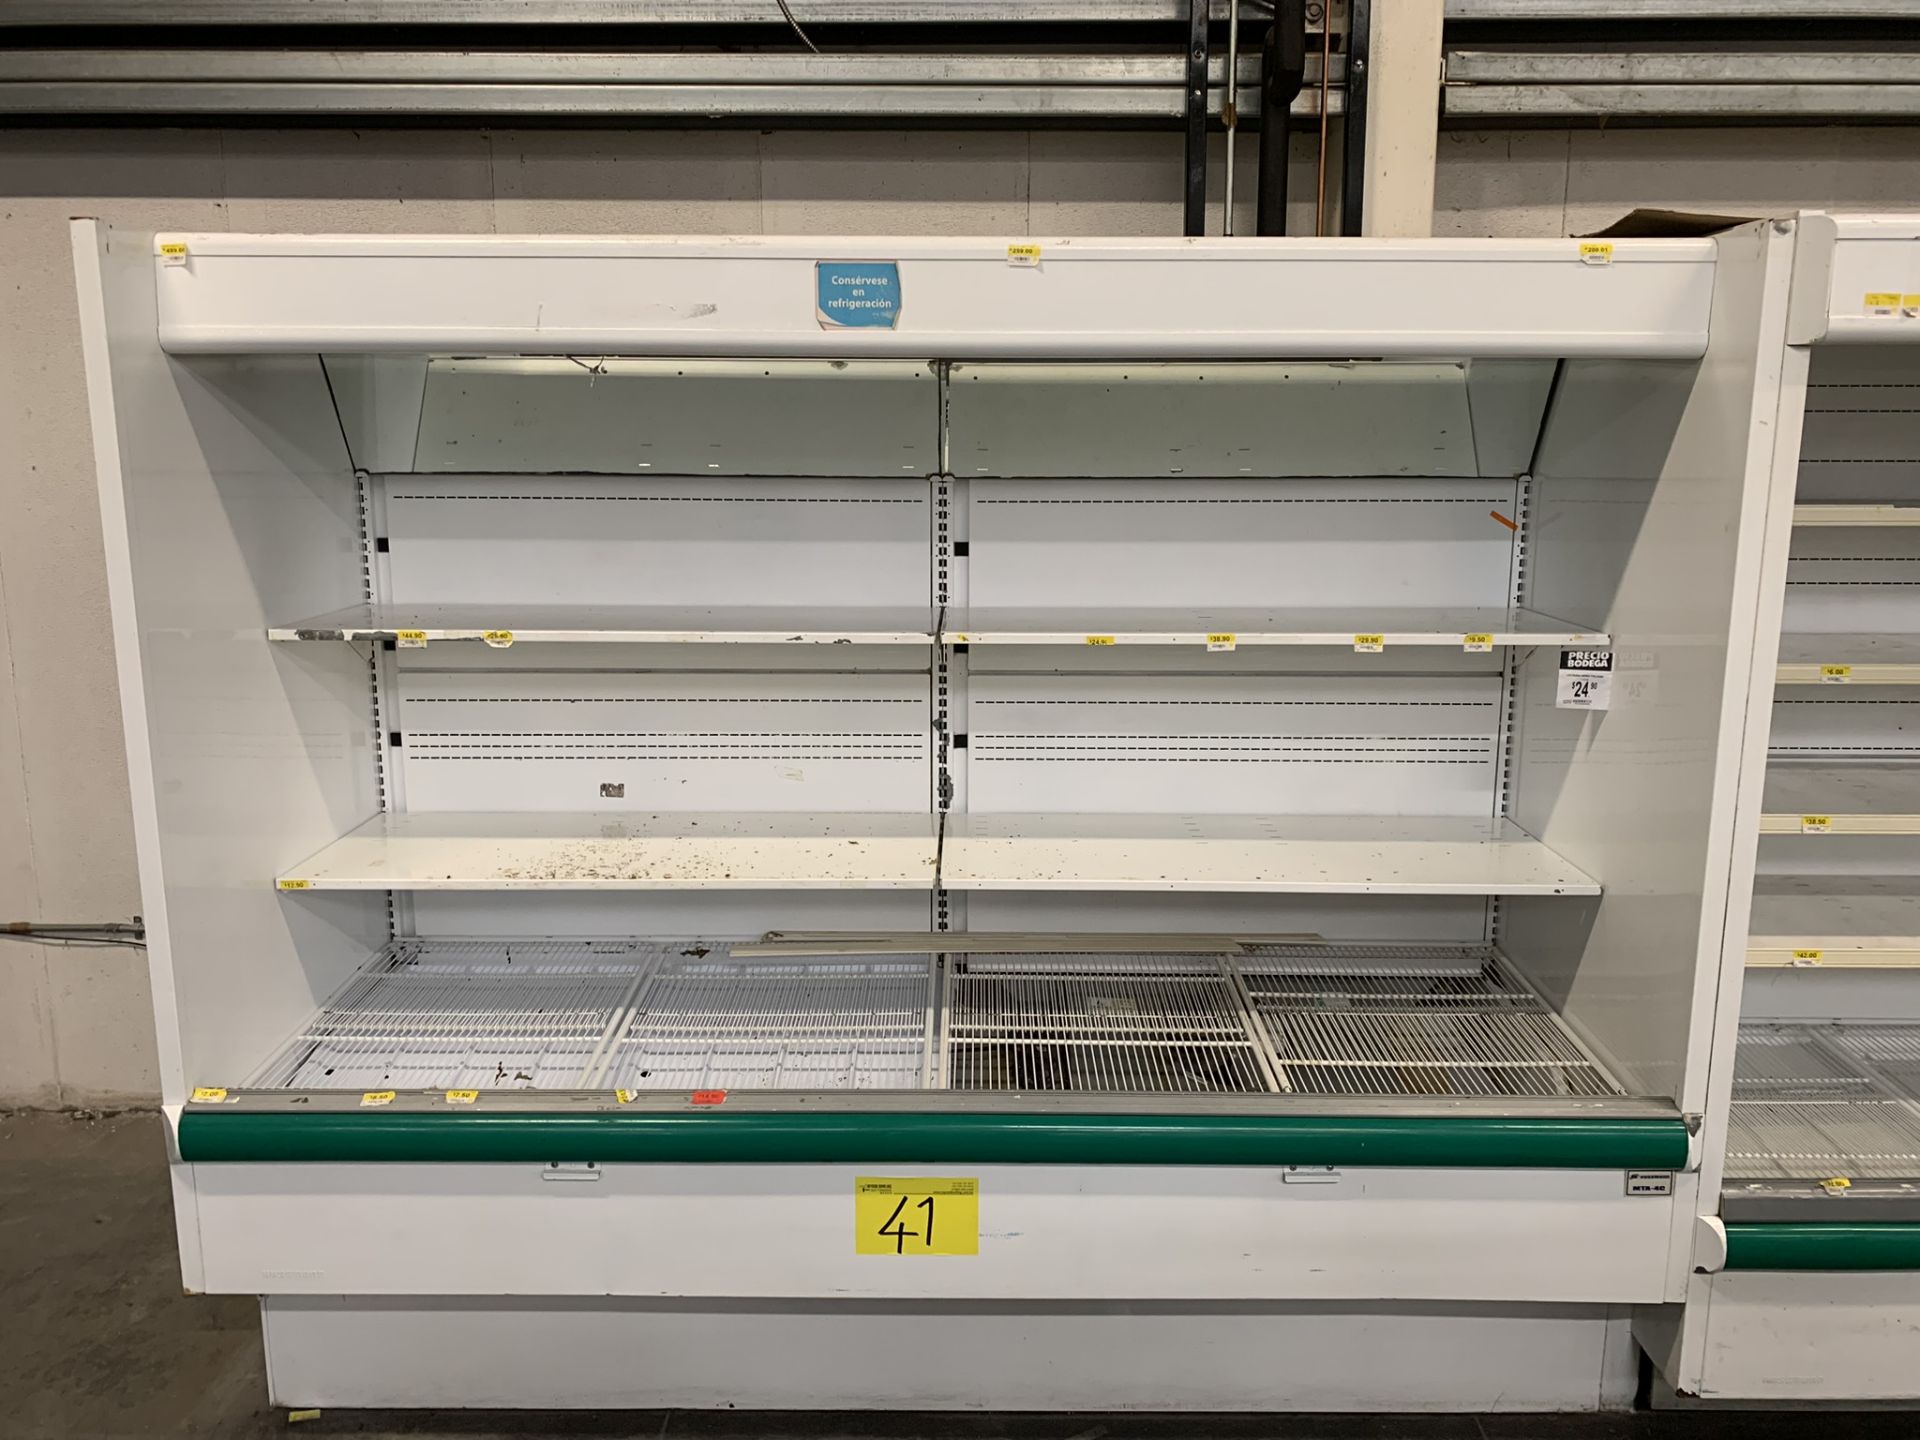 Hussmann refrigerated display case with 1 section, measures 2.50 x 1.03 x 2.09 meters - Image 3 of 9